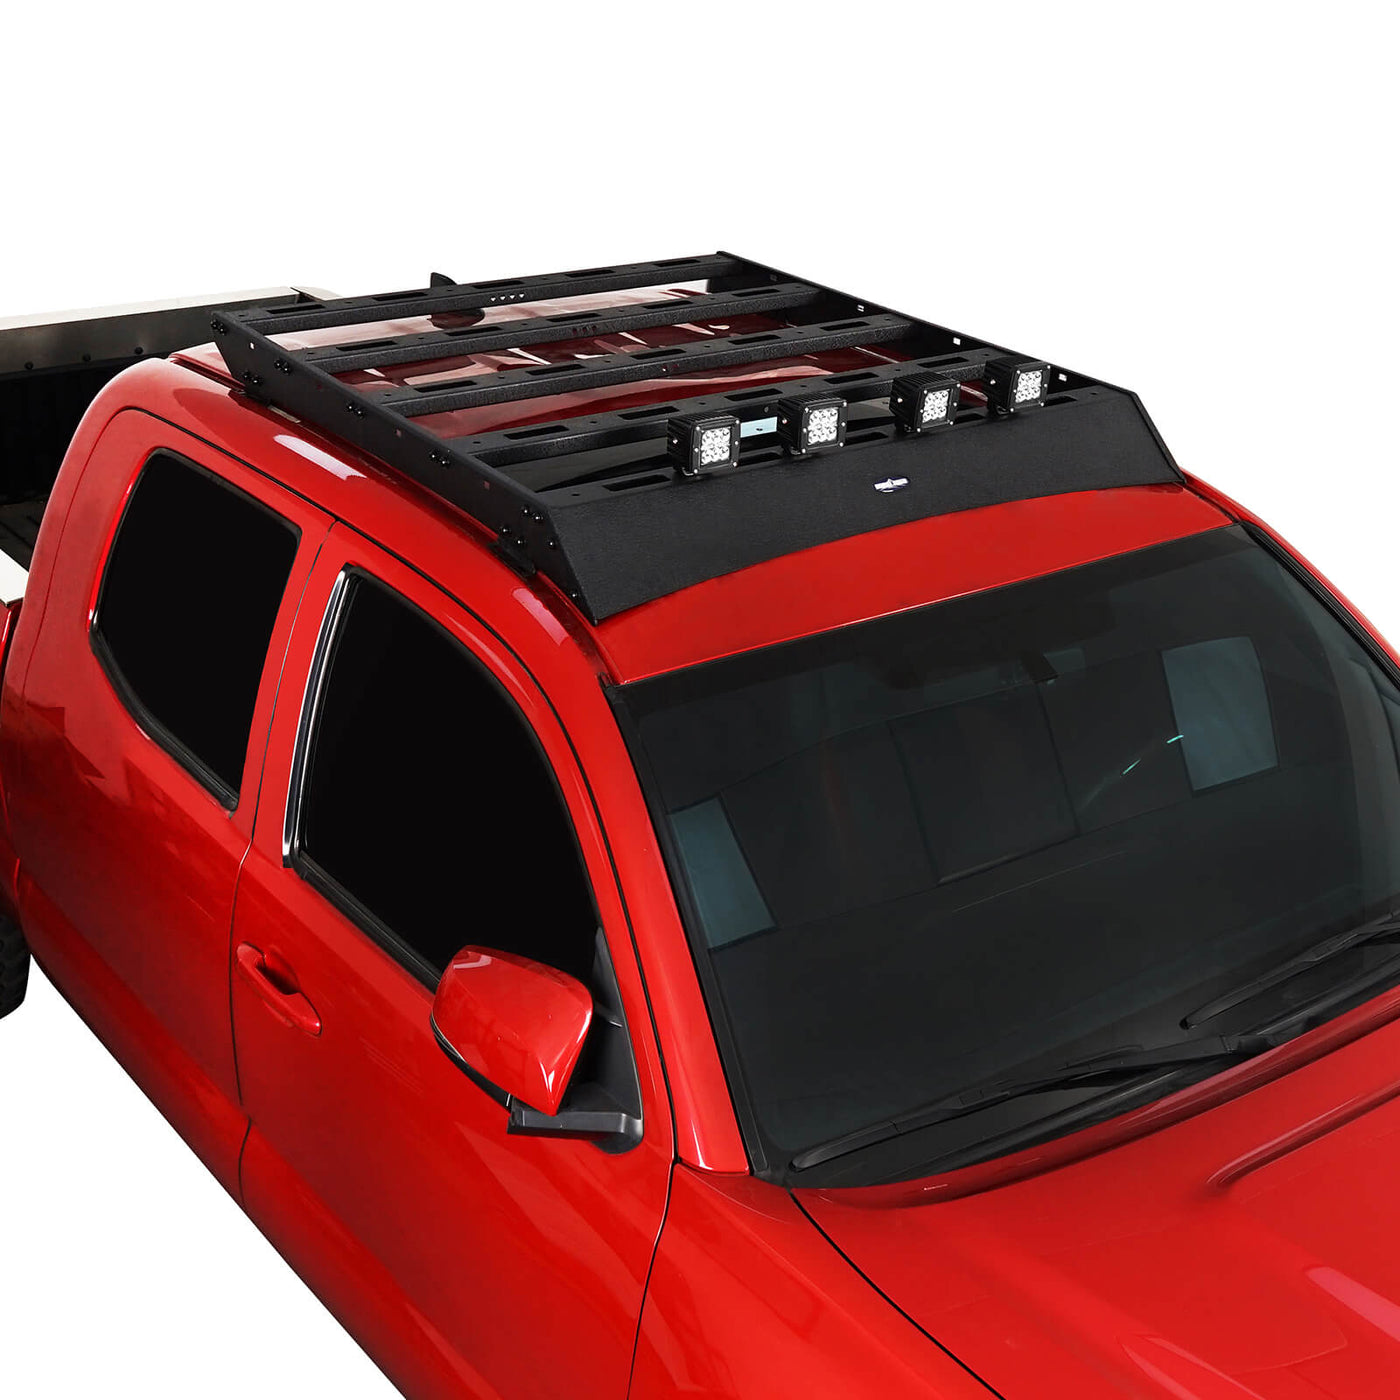 Tacoma Access Cab Roof Rack for 2005-2021 Toyota Tacoma Gen 2/3 - Hooke